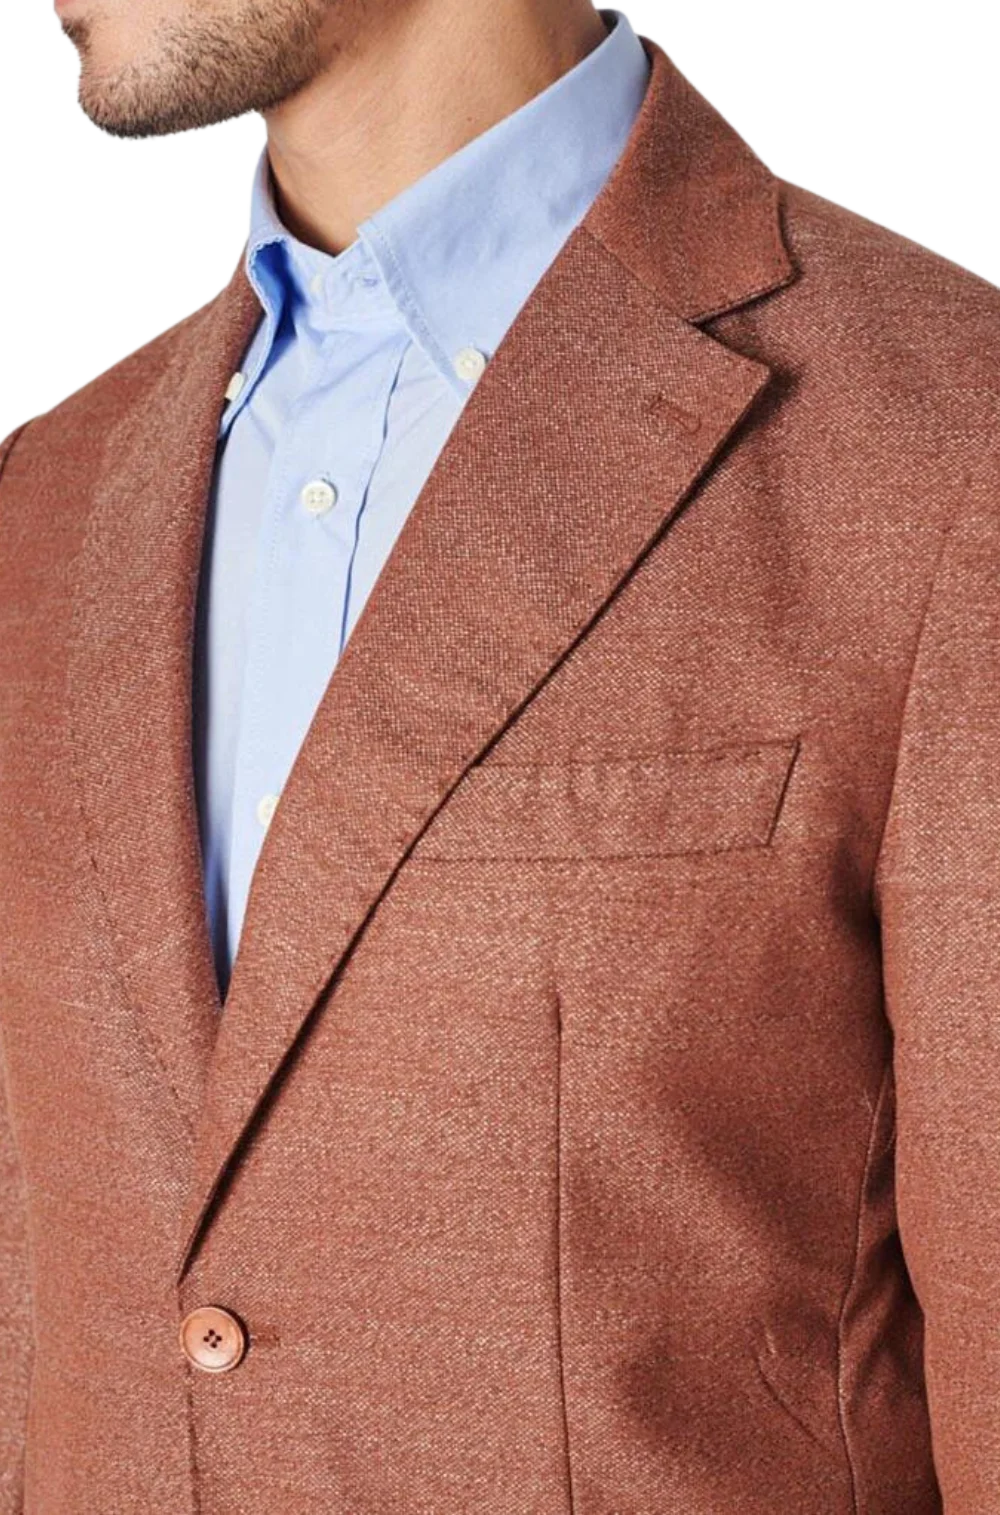 Men's Fusaro Austine Melange Wool Blend Jacket in Rust (21089) - available in-store, 337 Monty Naicker Street, Durban CBD or online at Omar's Tailors & Outfitters online store.   A men's fashion curation for South African men - established in 1911.